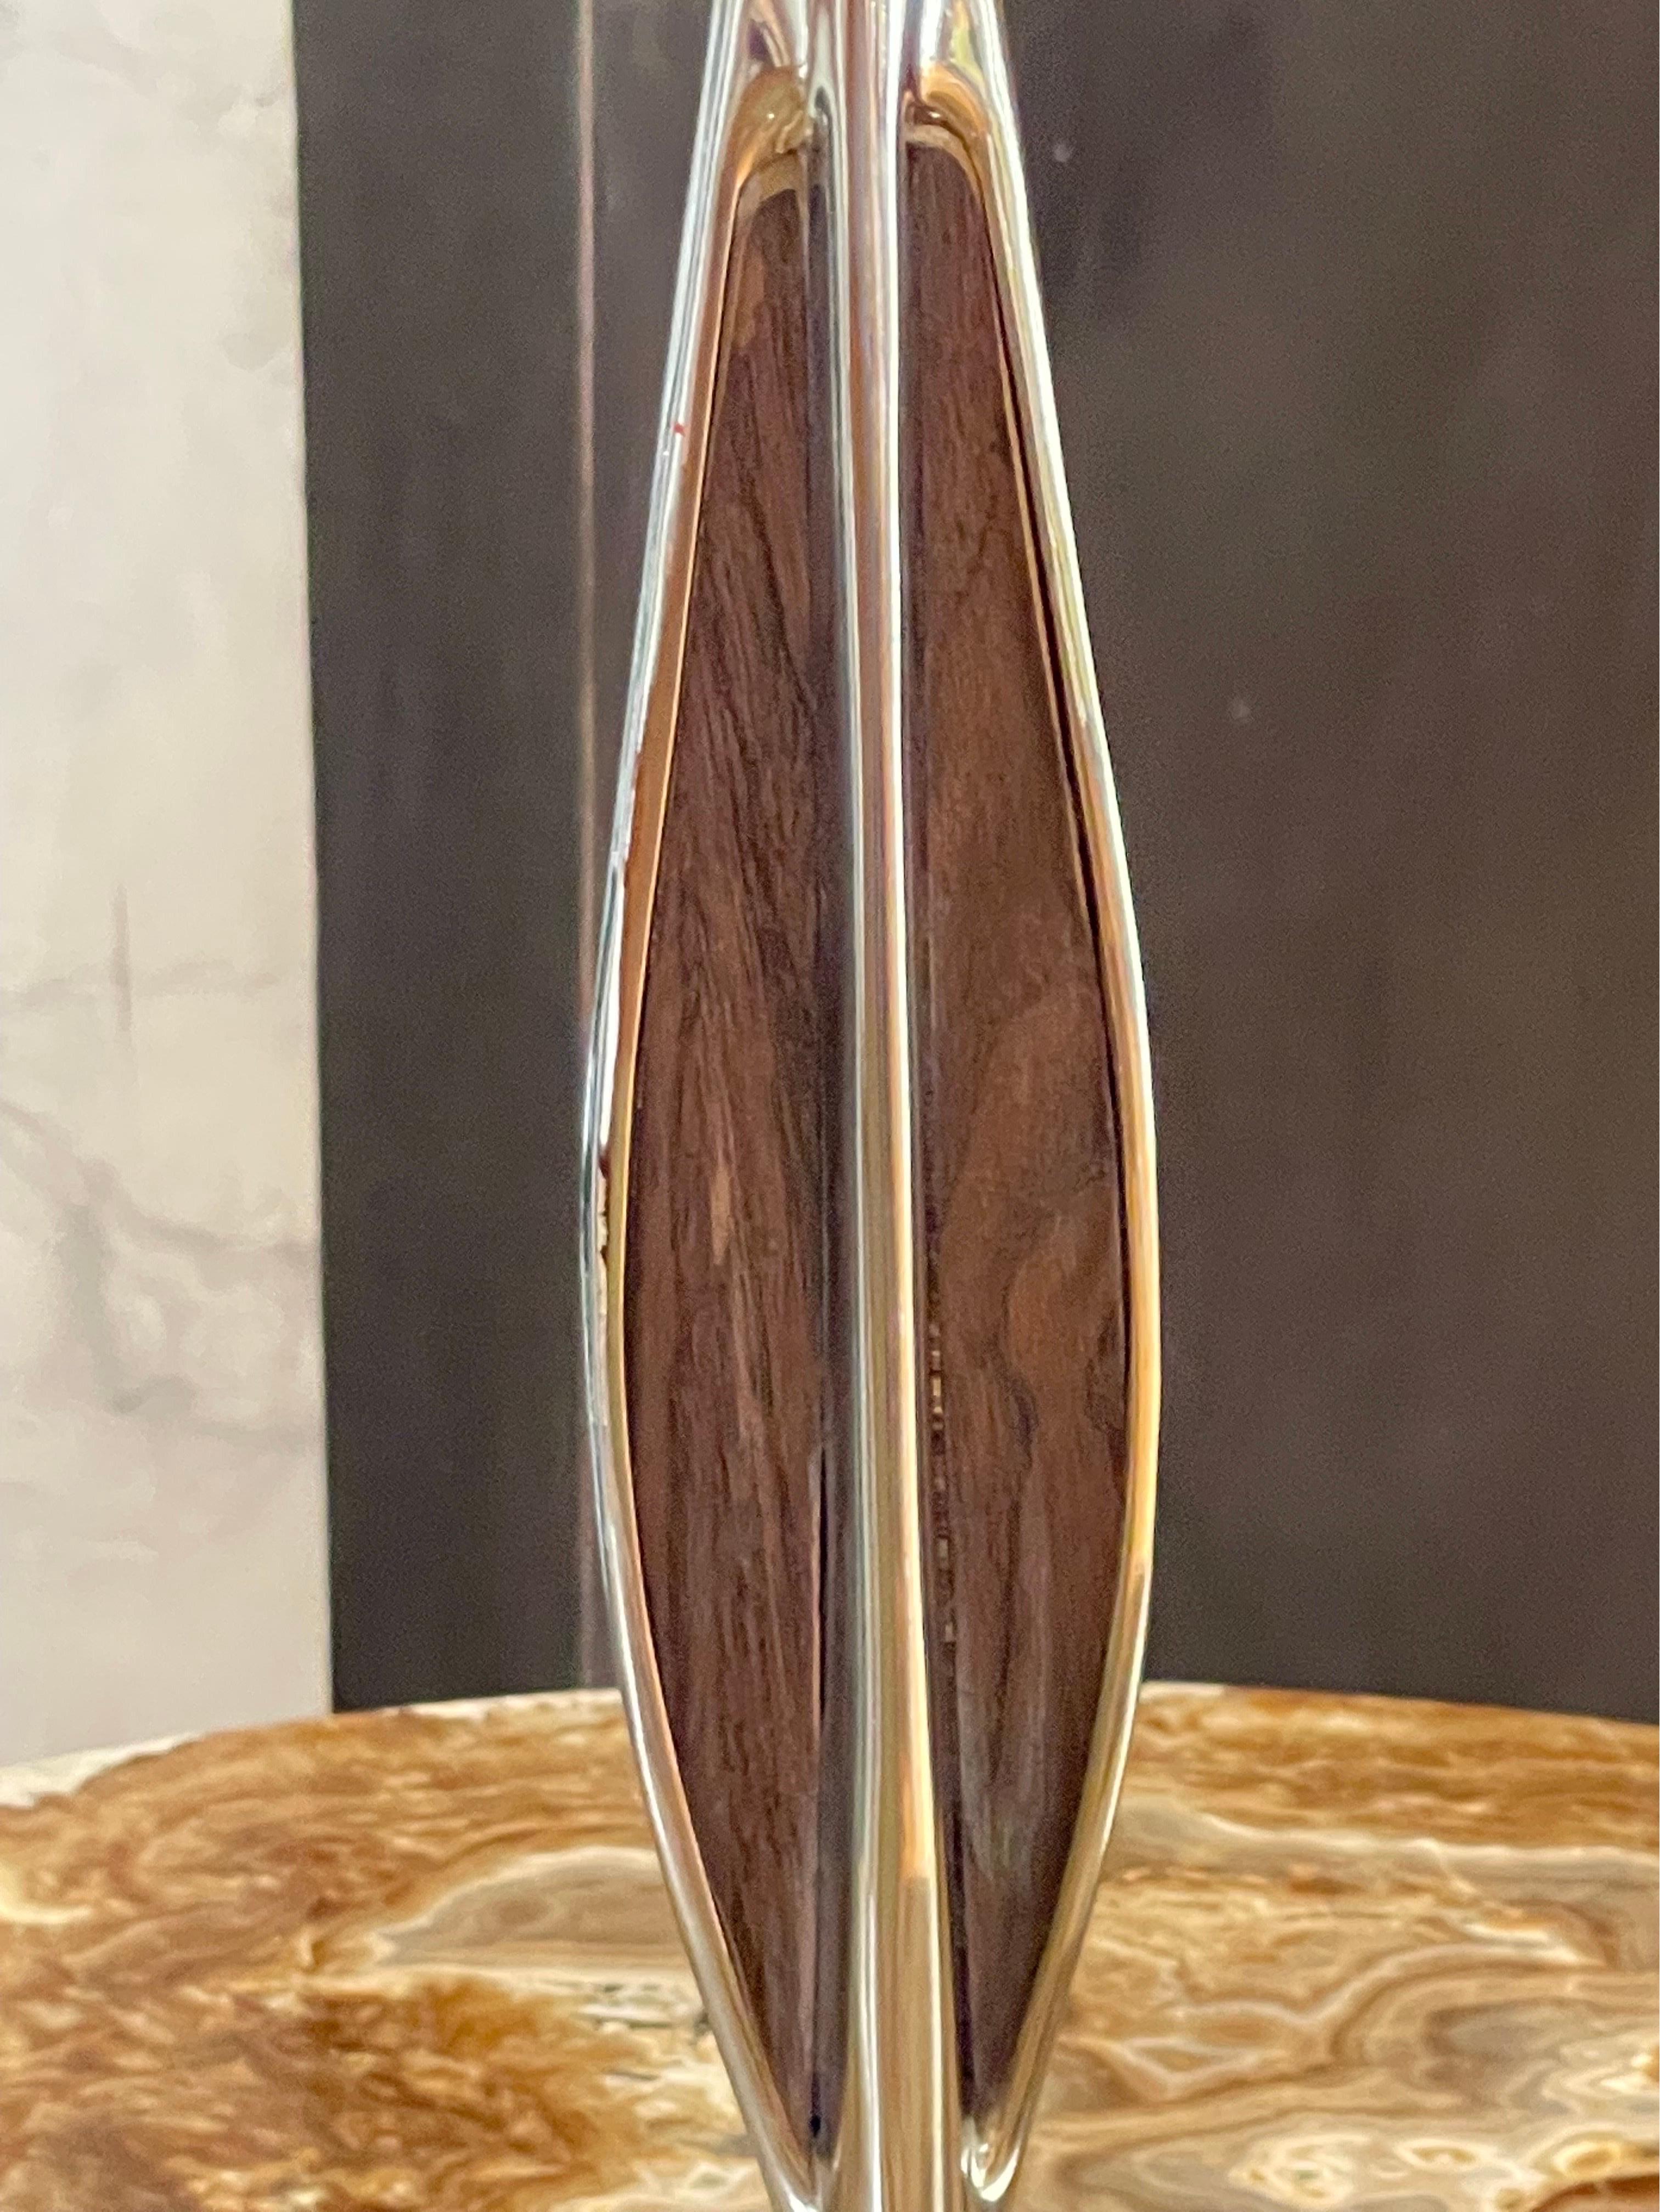 The Laurel lamp Mfg. Co. of Newark, NJ produced a variety of high quality mid century modern lighting and lamp products in the United States. The designers used walnut and other wood veneers on solid metal creating organic forms. Laurel Lamp Company